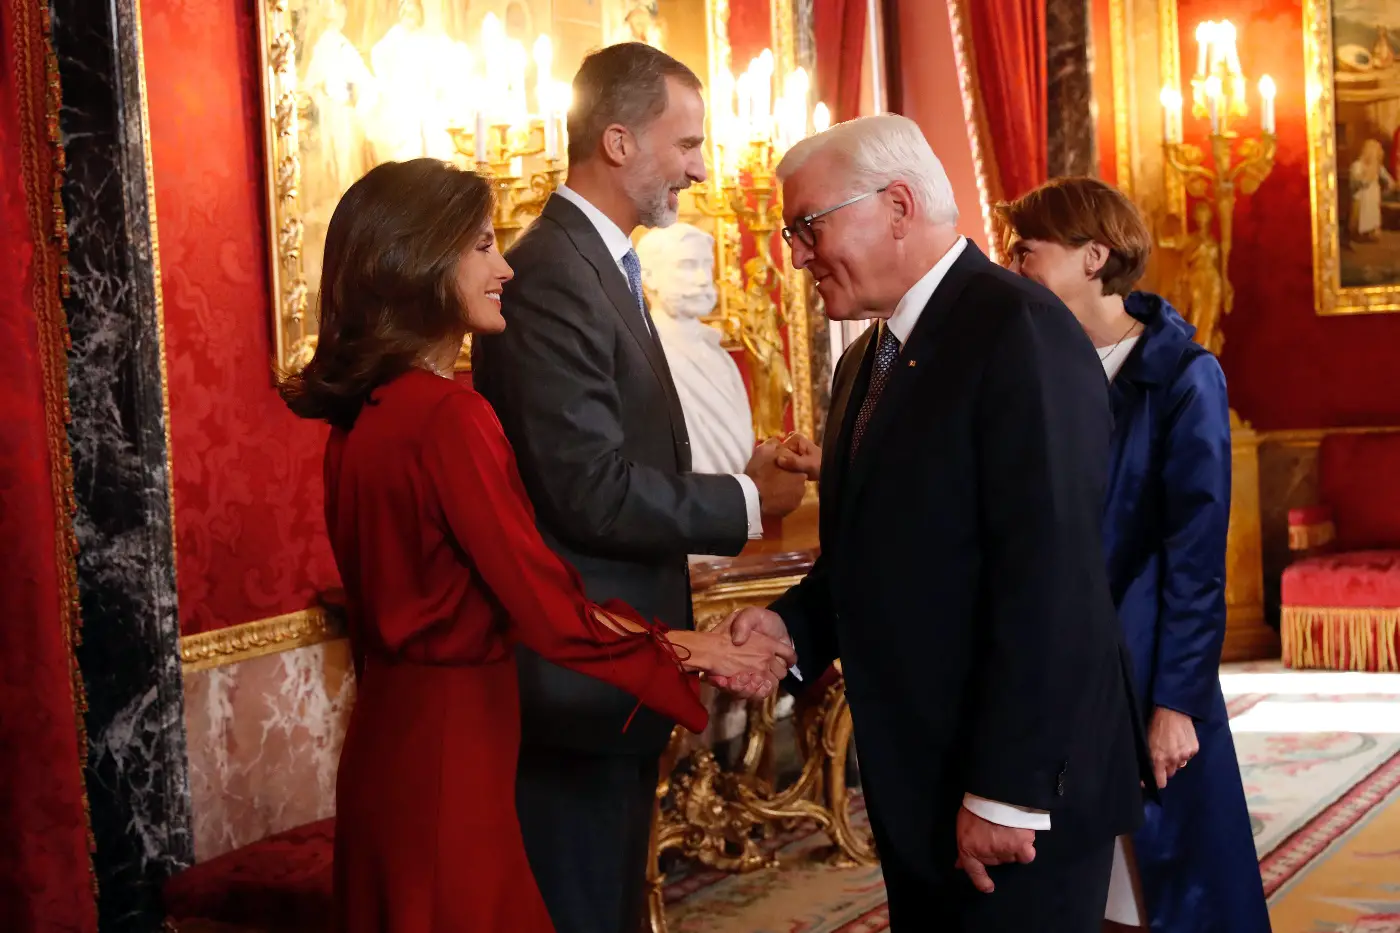 King Felipe and Queen Letizia welcomed the President of Germany Mr Frank-Walter Steinmeier and Mrs Elke Büdenbender at the royal palace in Madrid